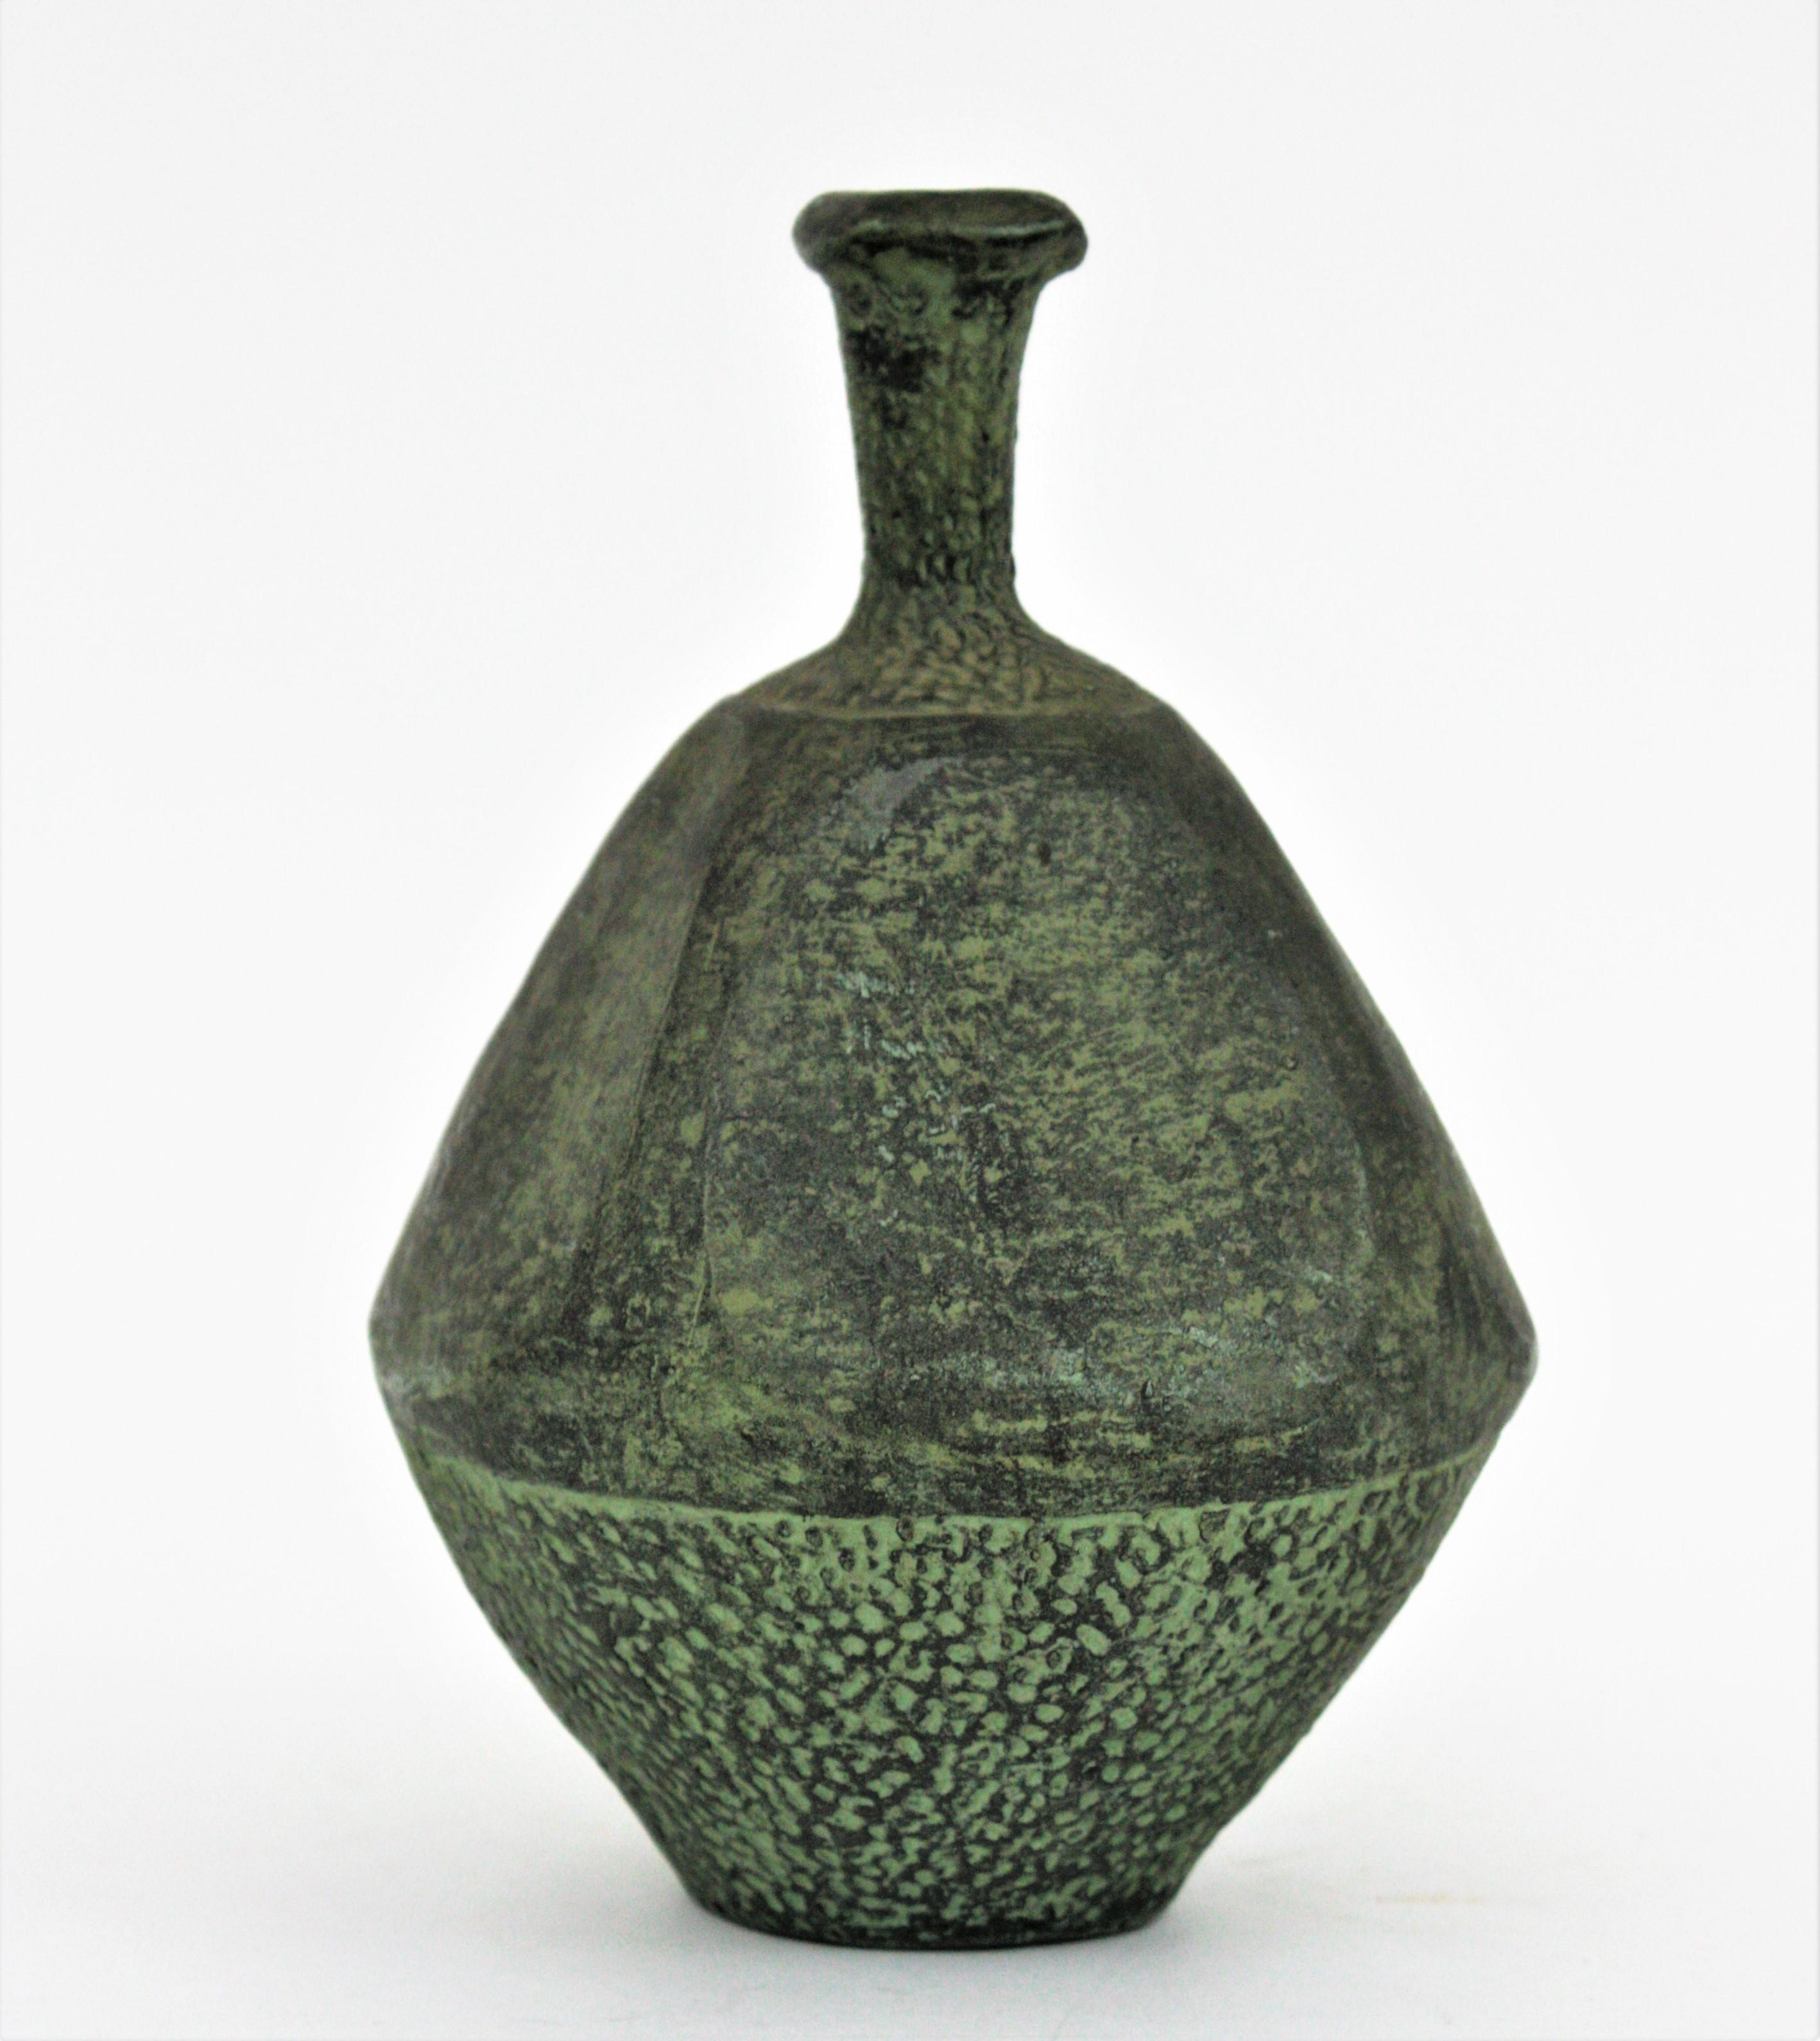 Eye-catching vase in green unglazed terracotta. Spain, 1940s
Catalan unglazed urn vase in green terracotta. Long neck and swollen body with engraved dot details at the bottom part
Elegant piece, beautiful from all sides. It is in great condition